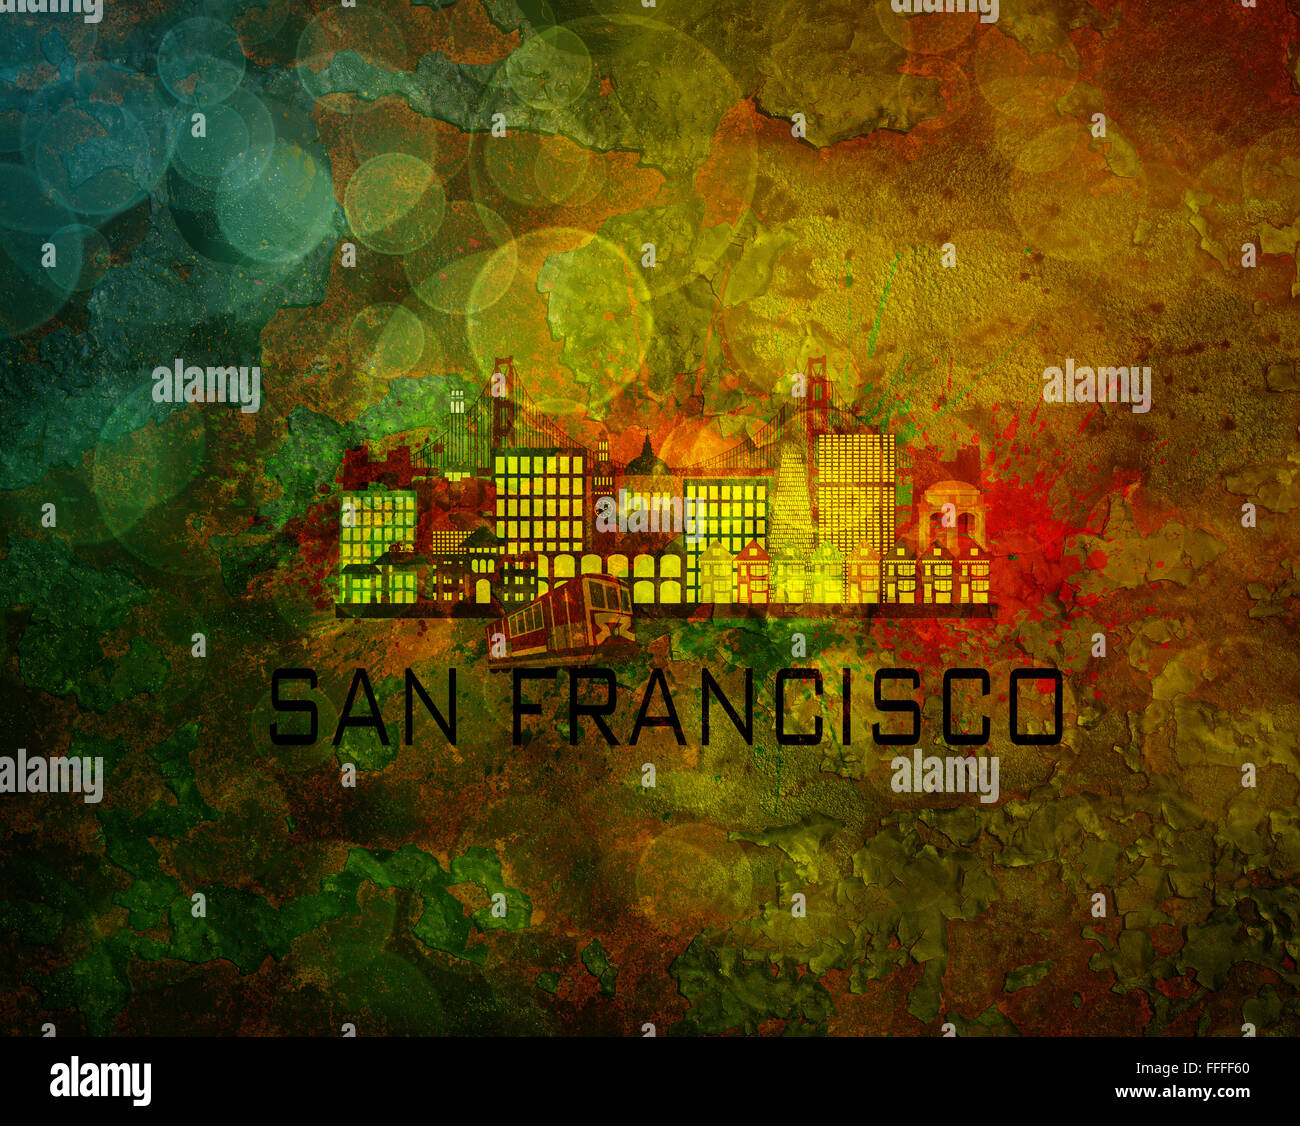 San Francisco California City Skyline with Paint Splatter Abstract on Grunge Texture Background Color Illustration Stock Photo